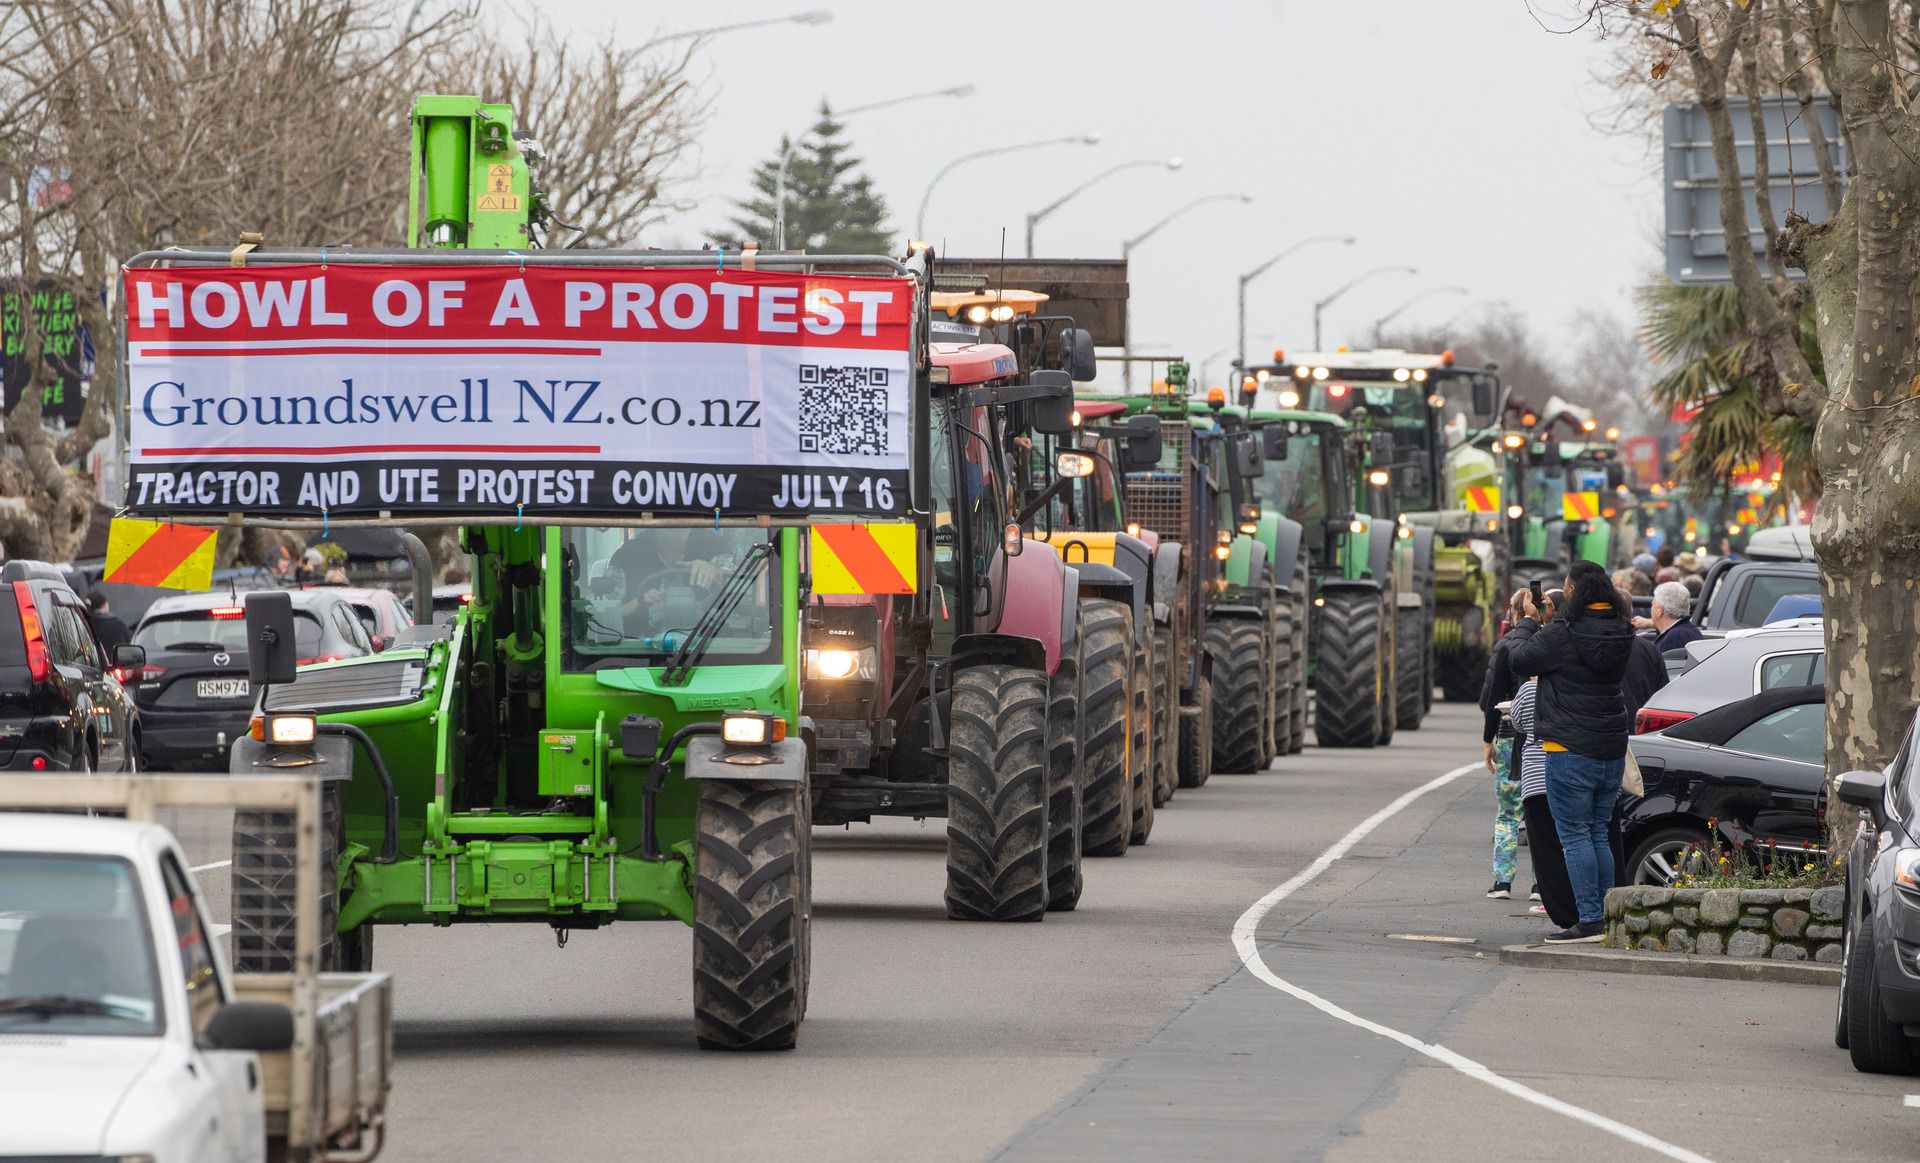 Farmers in New Zealand staged countrywide protests on Thursday against the government’s plans to tax methane emissions from farm animals